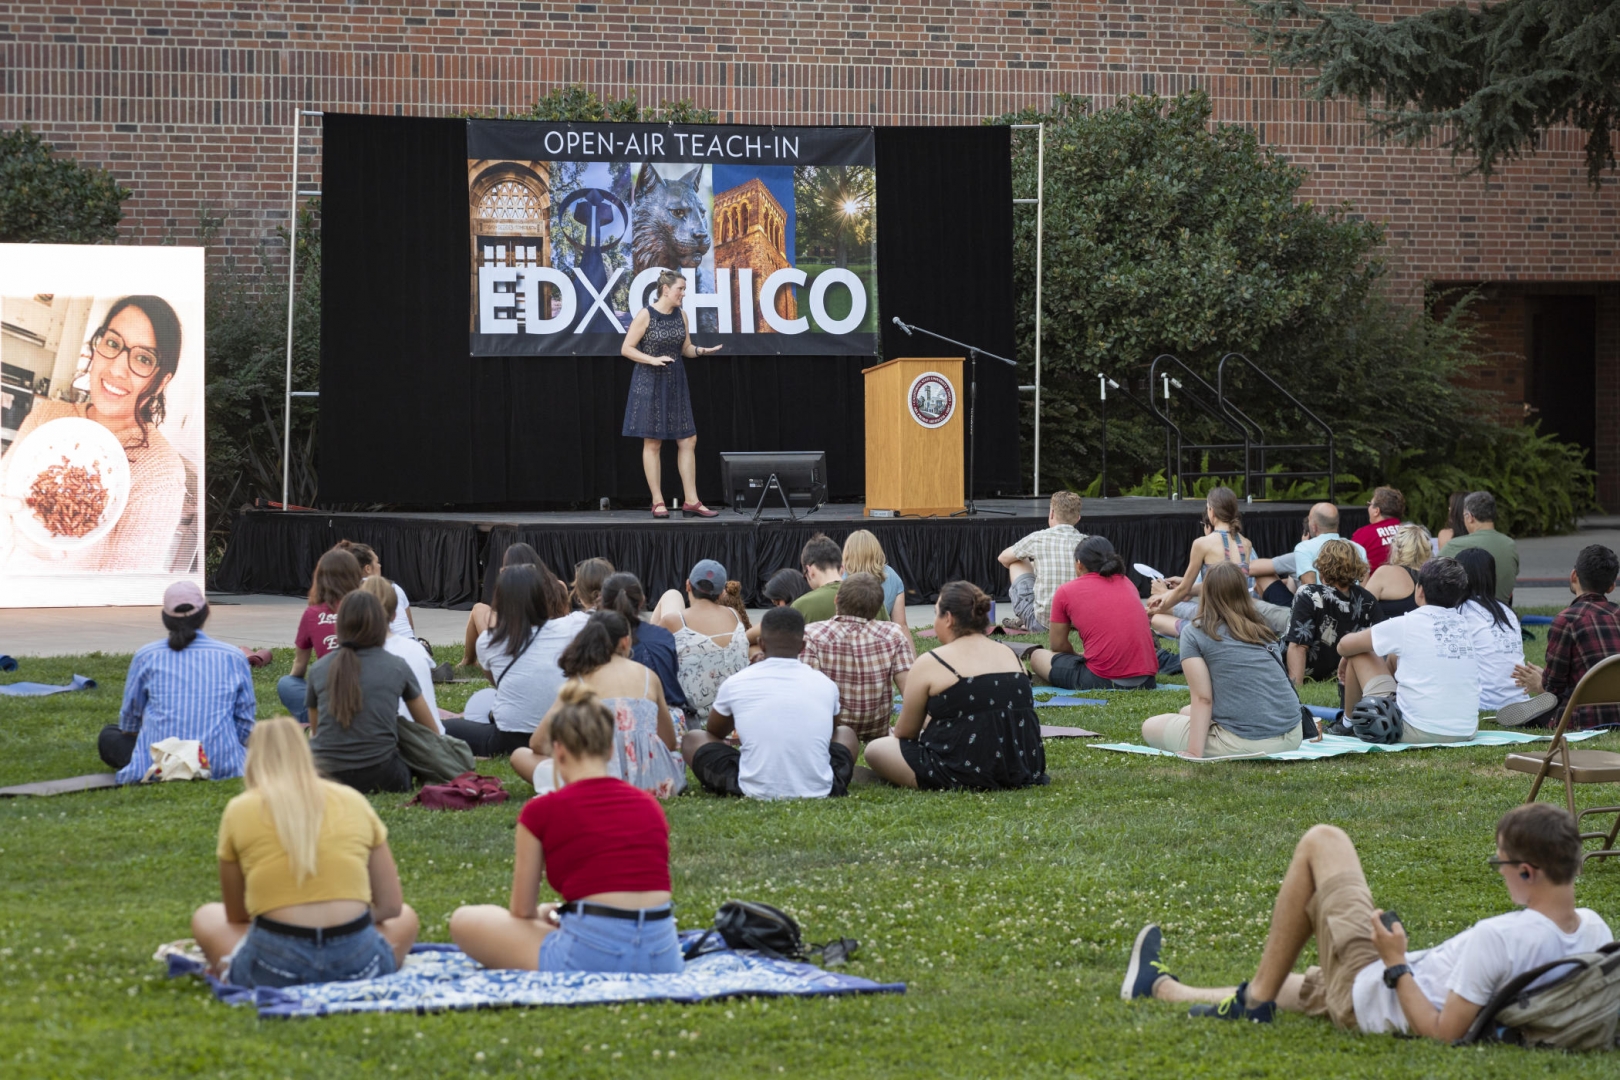 Students sit on a lawn watching a presentation by faculty on a stage in front of a screen that reads E-D-X Chico.